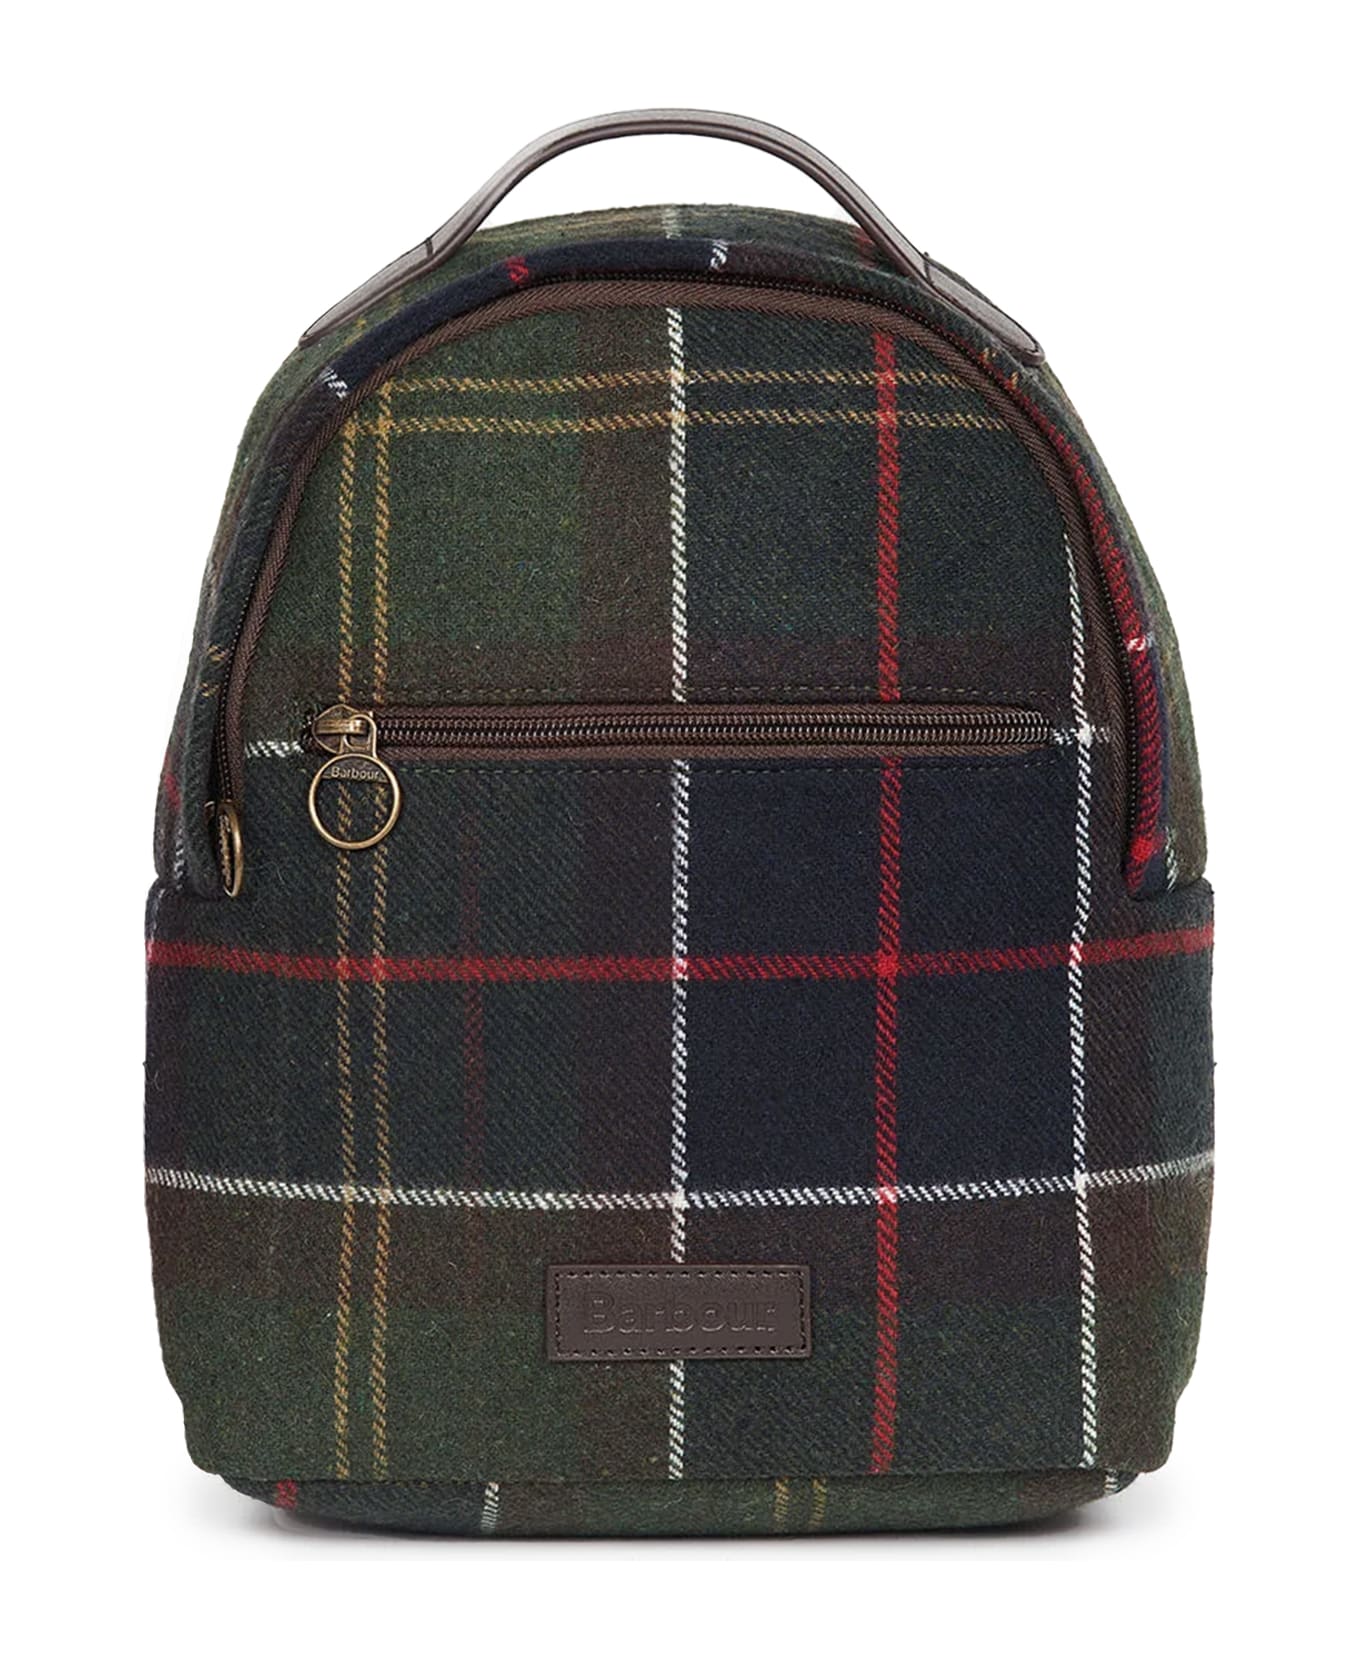 Barbour Caley Tartan Backpack - Green バックパック